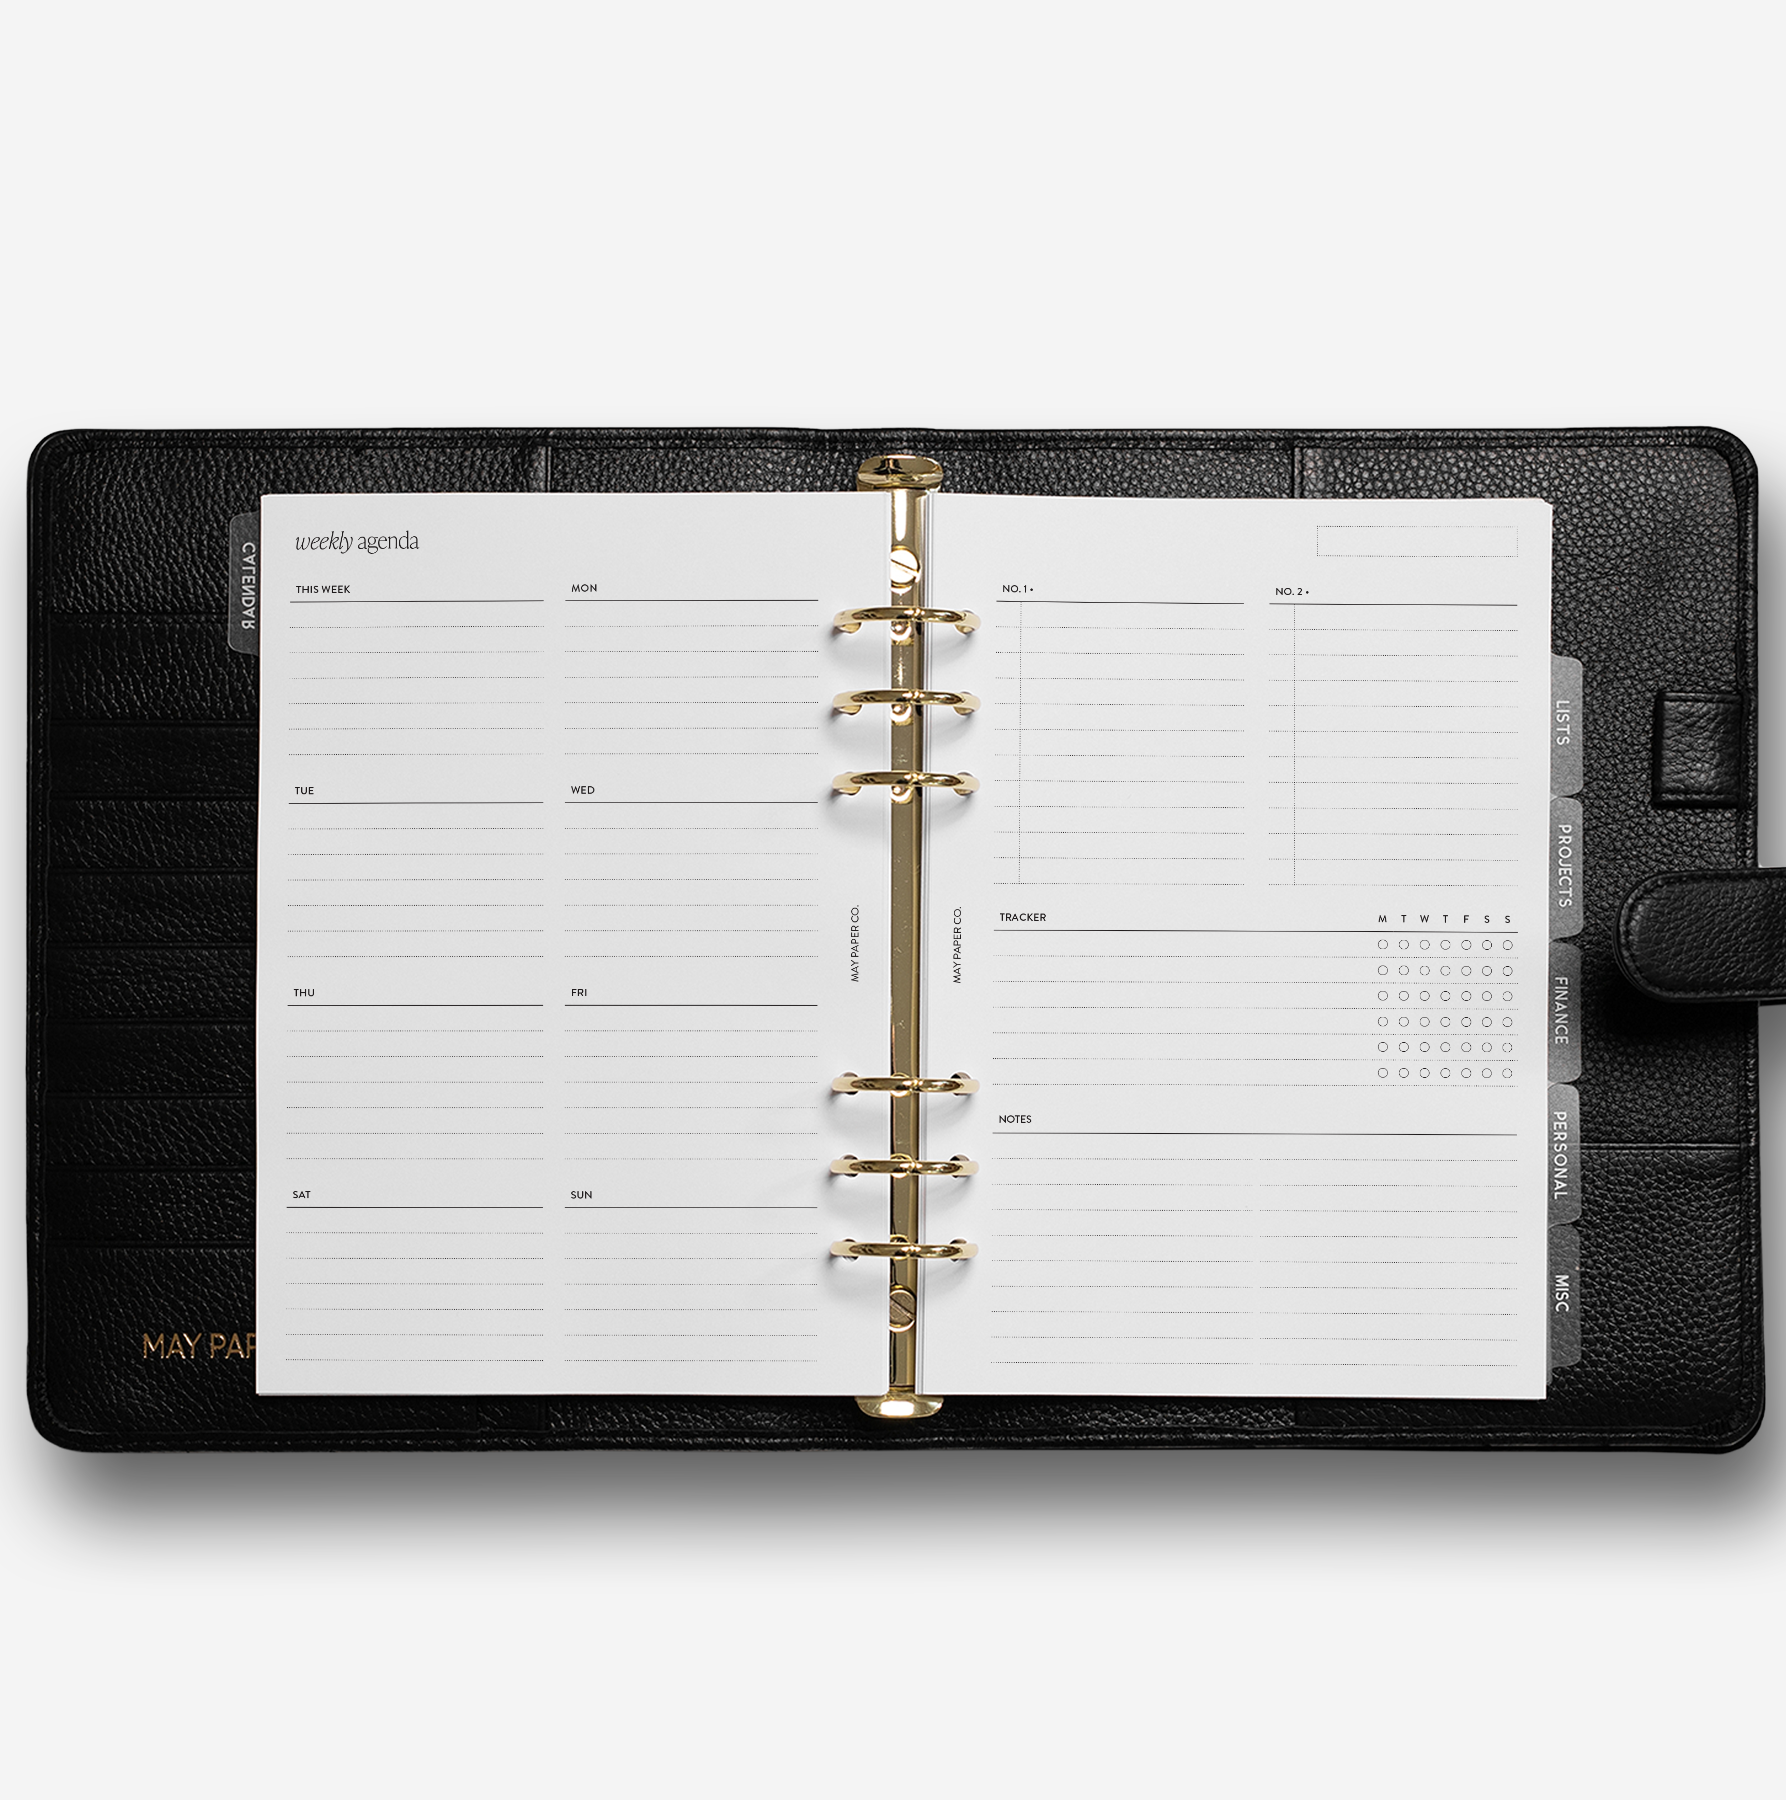 Undated Weekly NO.05 with Tracker Planner Insert